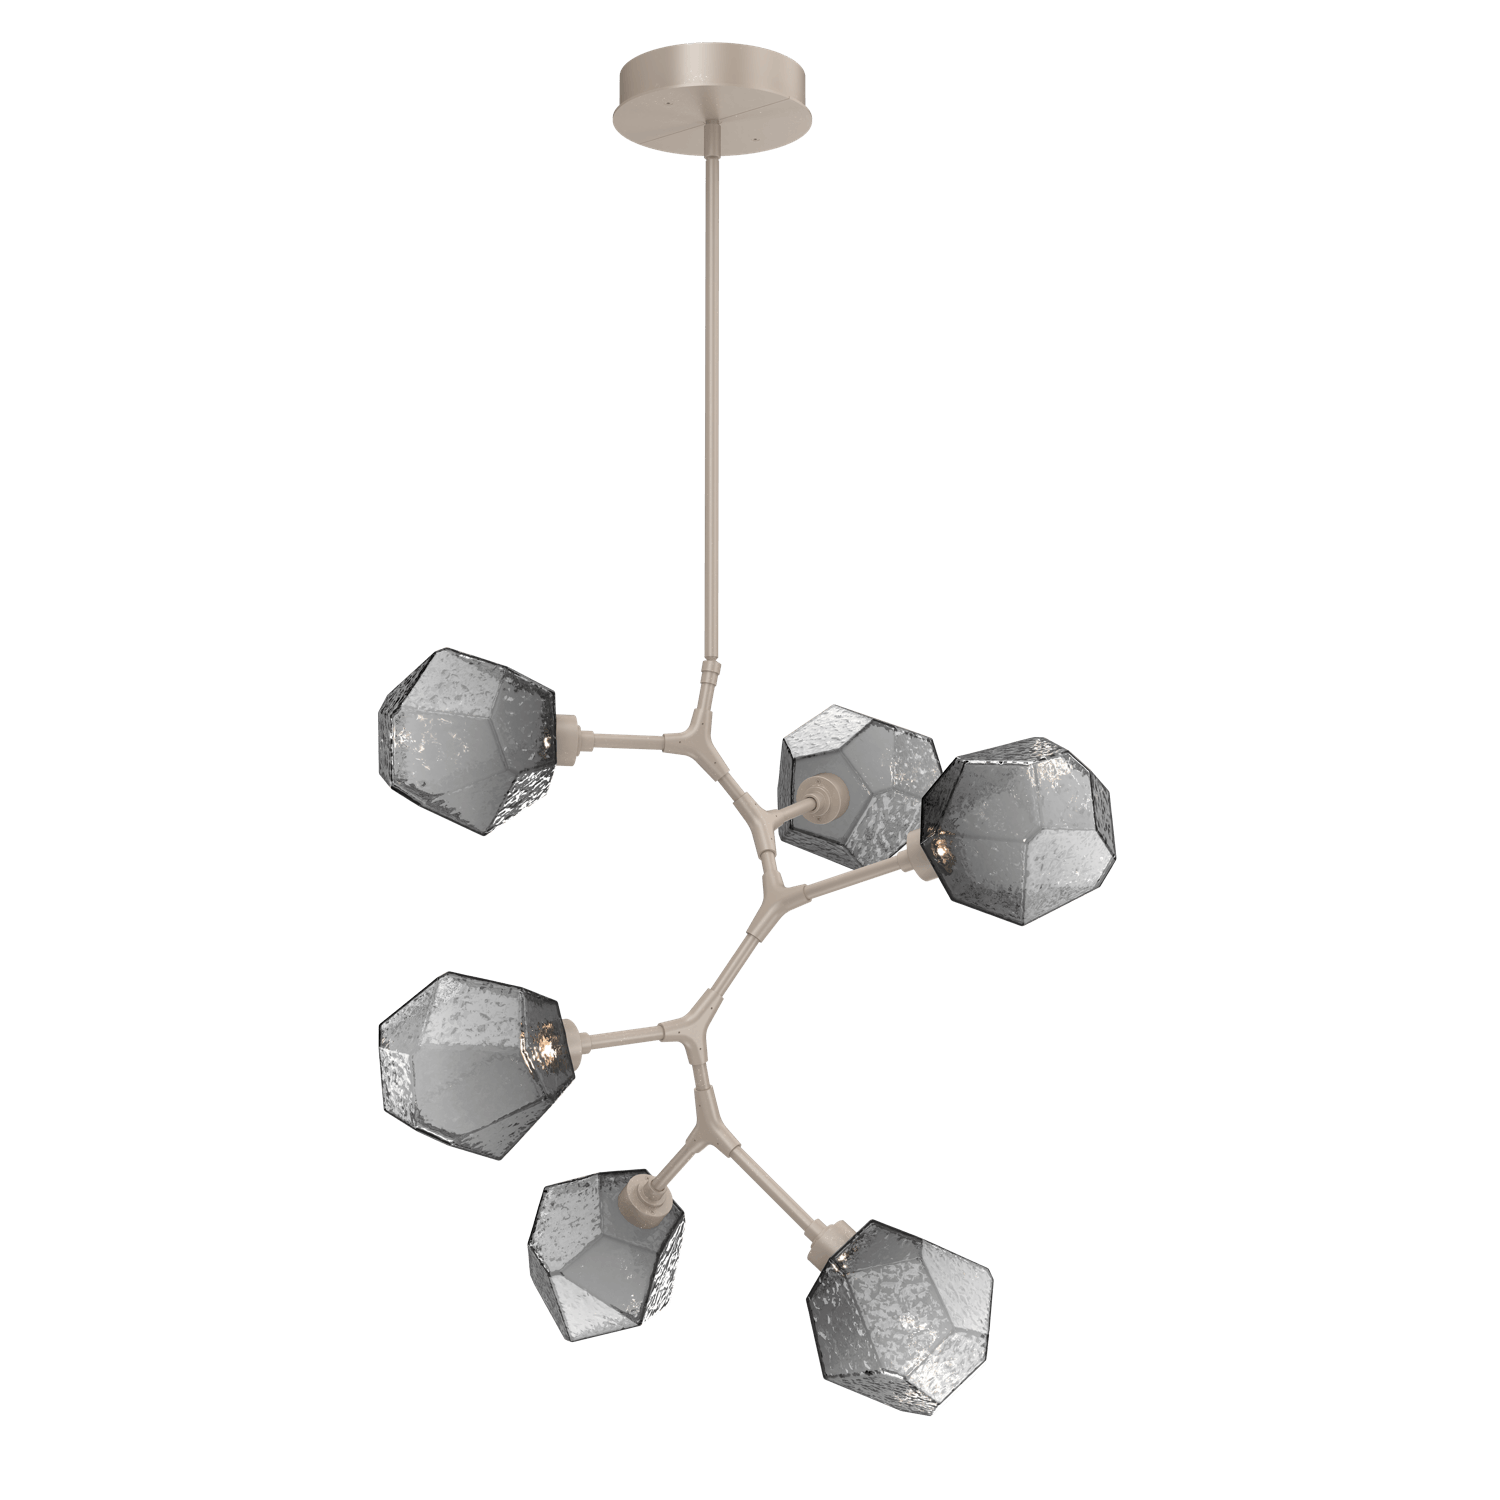 CHB0039-VA-BS-S-Hammerton-Studio-Gem-6-light-modern-vine-chandelier-with-metallic-beige-silver-finish-and-smoke-blown-glass-shades-and-LED-lamping